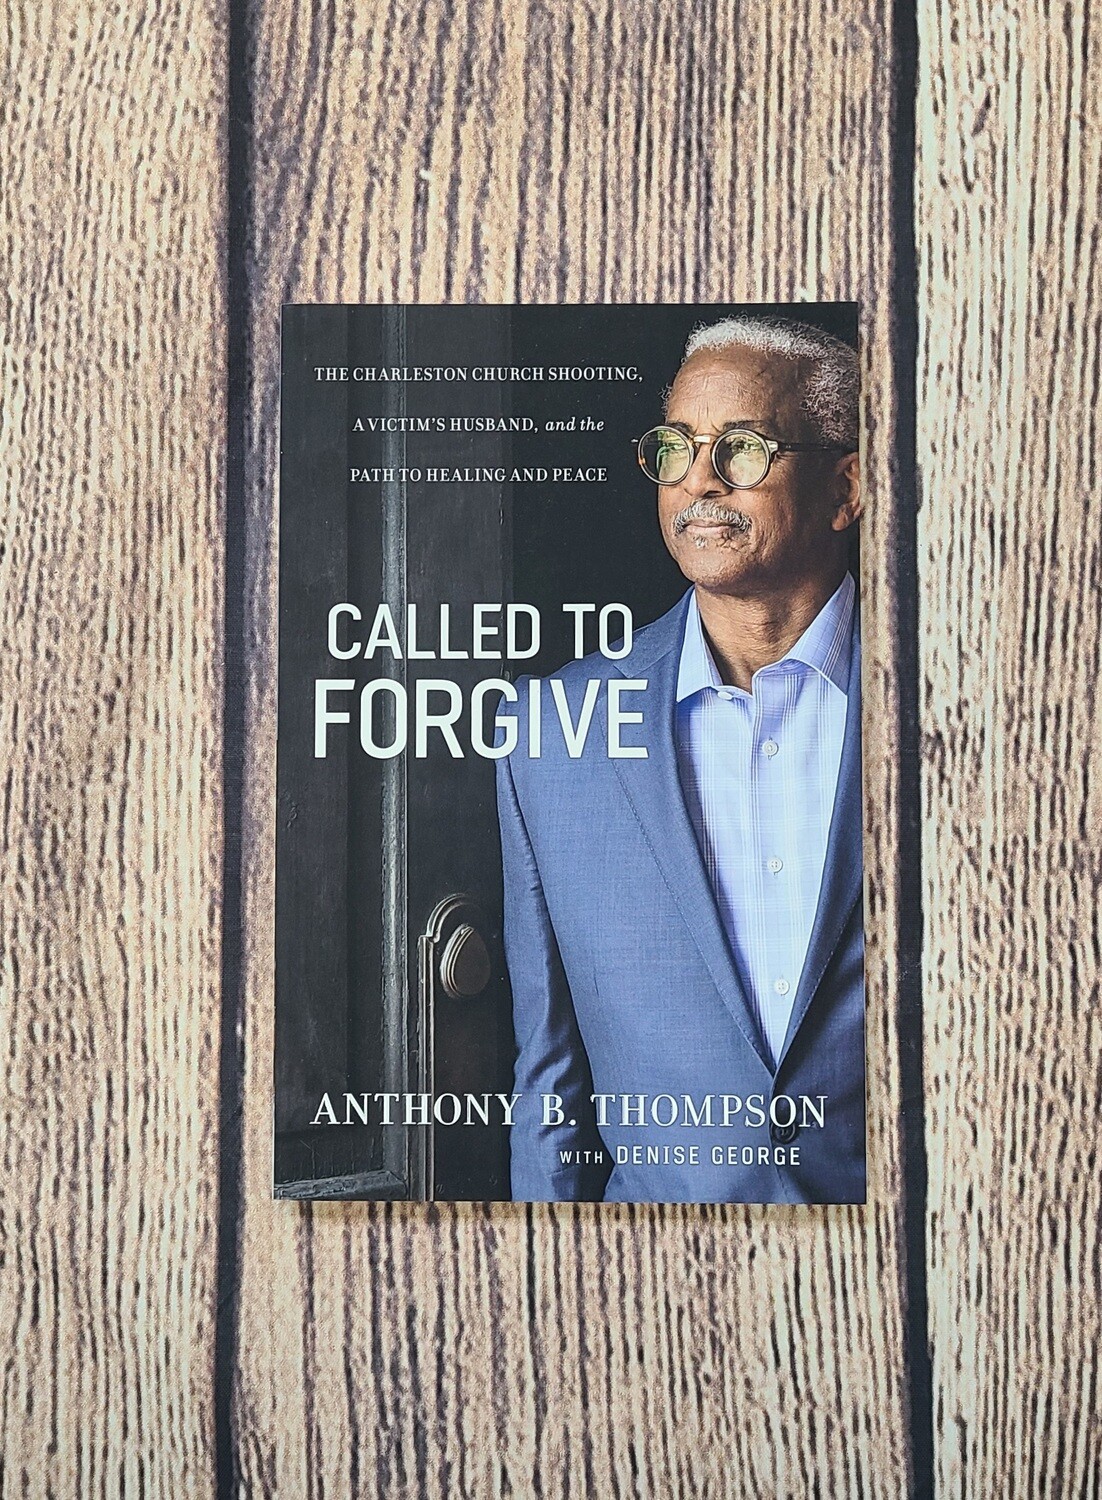 Called to Forgive by Anthony B. Thompson with Denise George